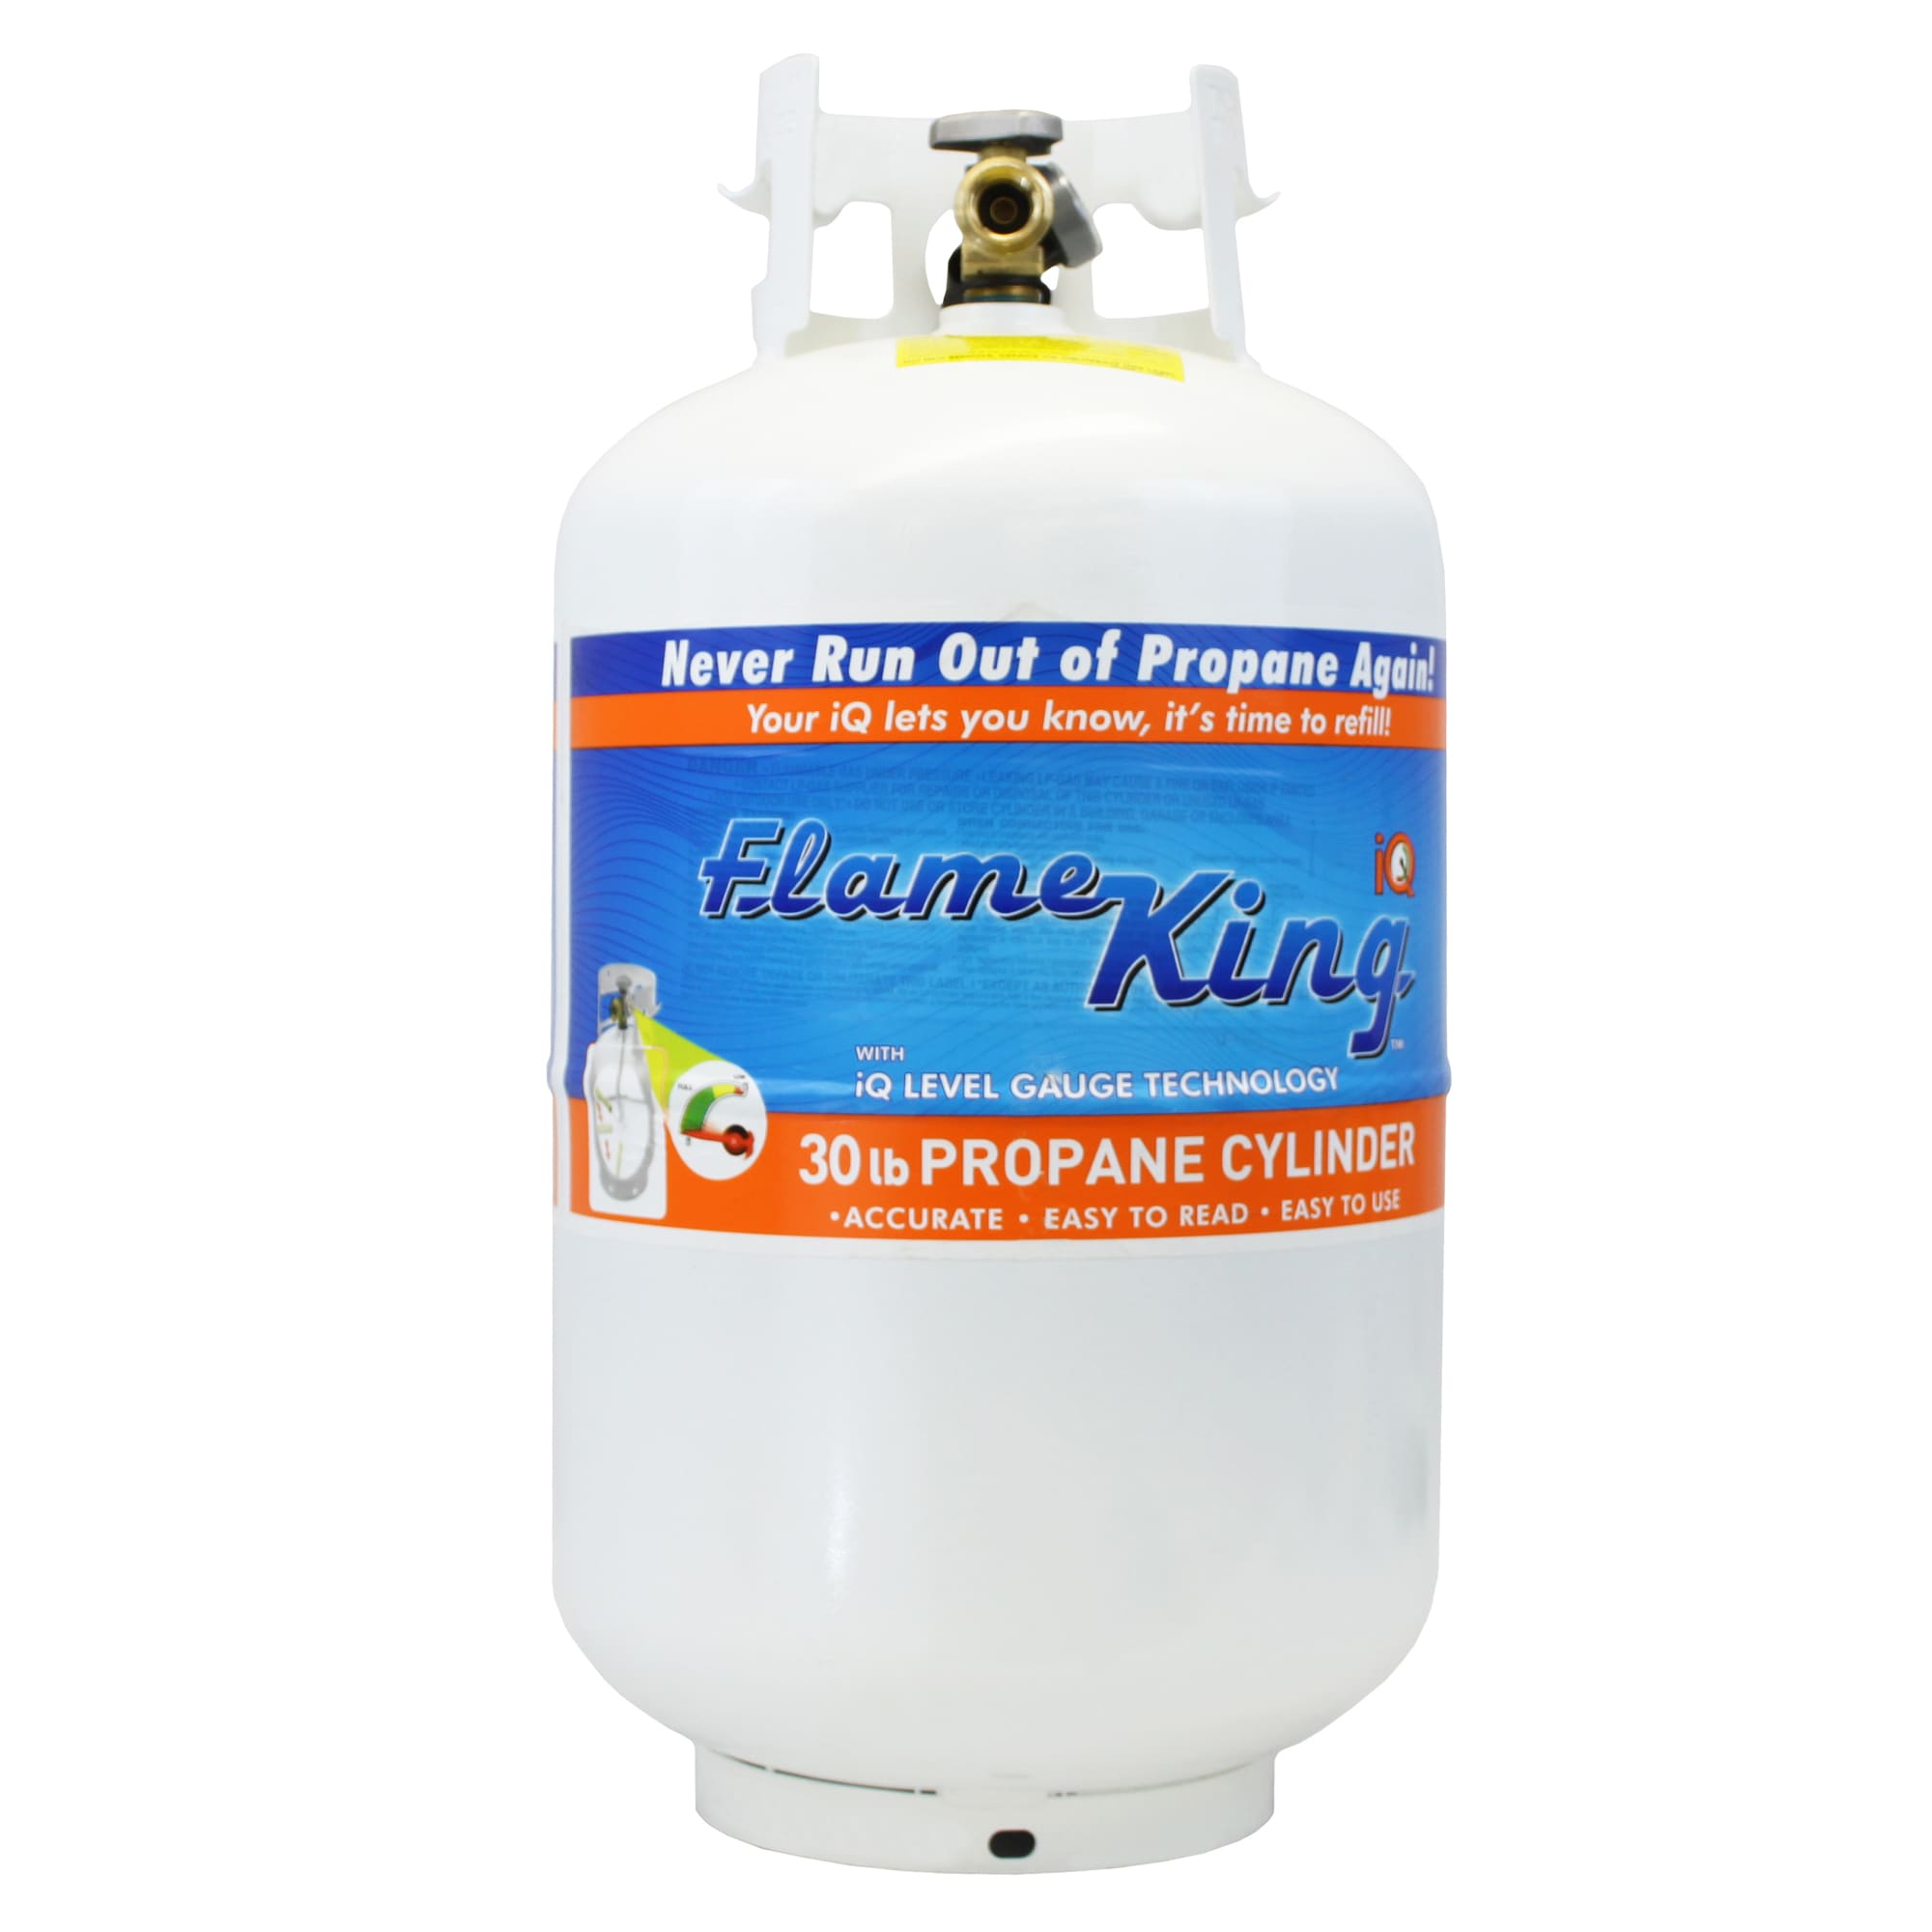 Propane tank maintenance will extend the life of your tank